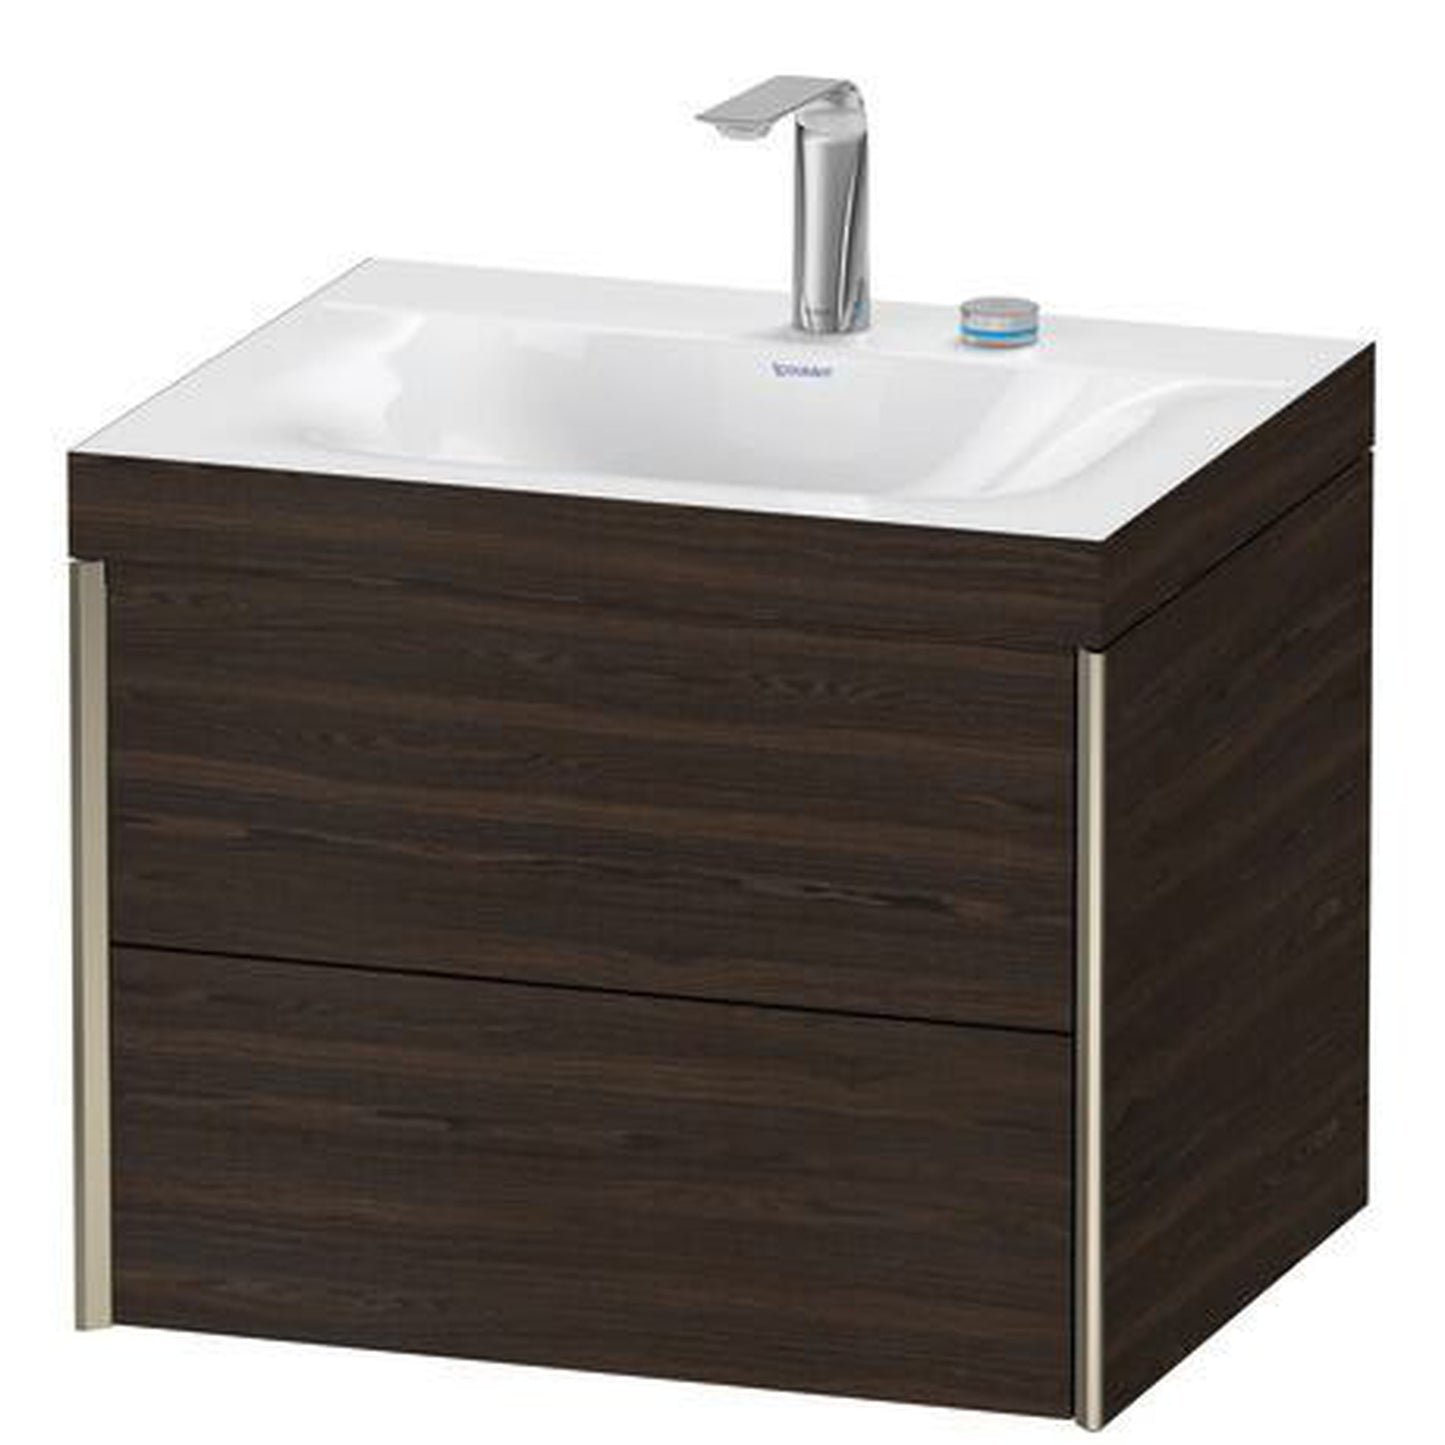 Duravit Xviu 24" x 20" x 19" Two Drawer C-Bonded Wall-Mount Vanity Kit With Two Tap Holes, Walnut Brushed (XV4614EB169C)